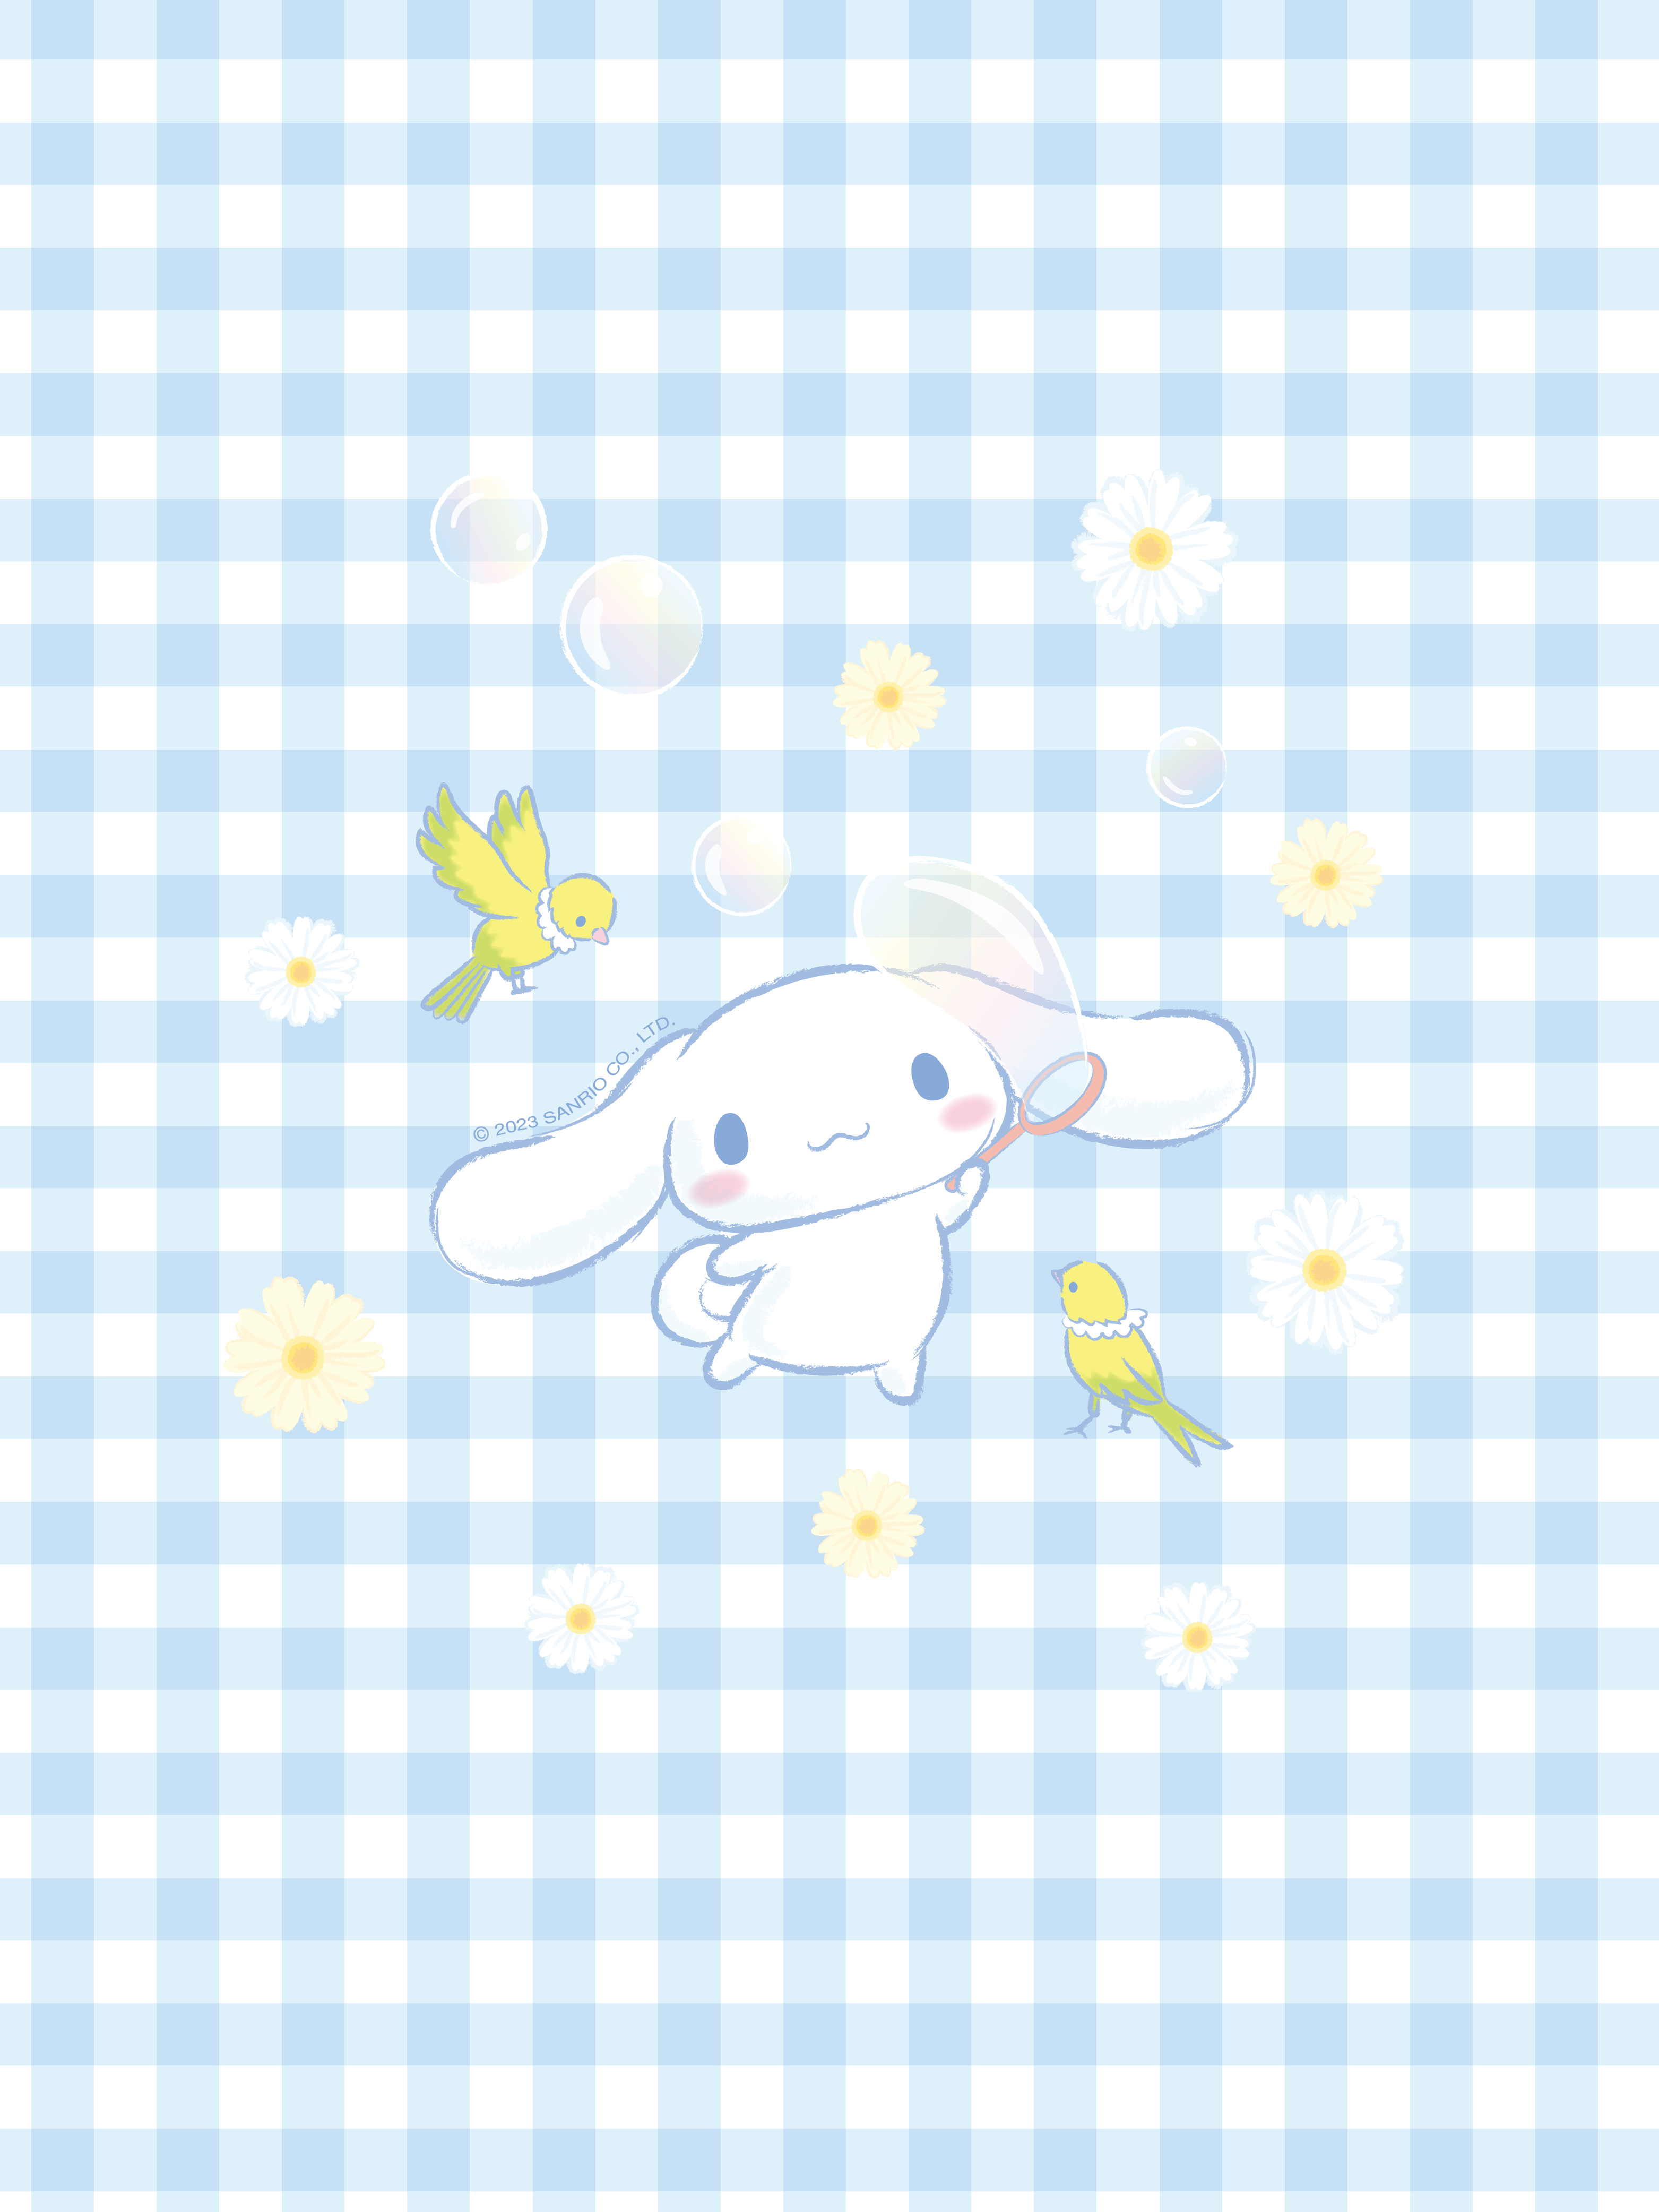 Cinnamoroll flying with two canary birds on a blue checkered background - Cinnamoroll